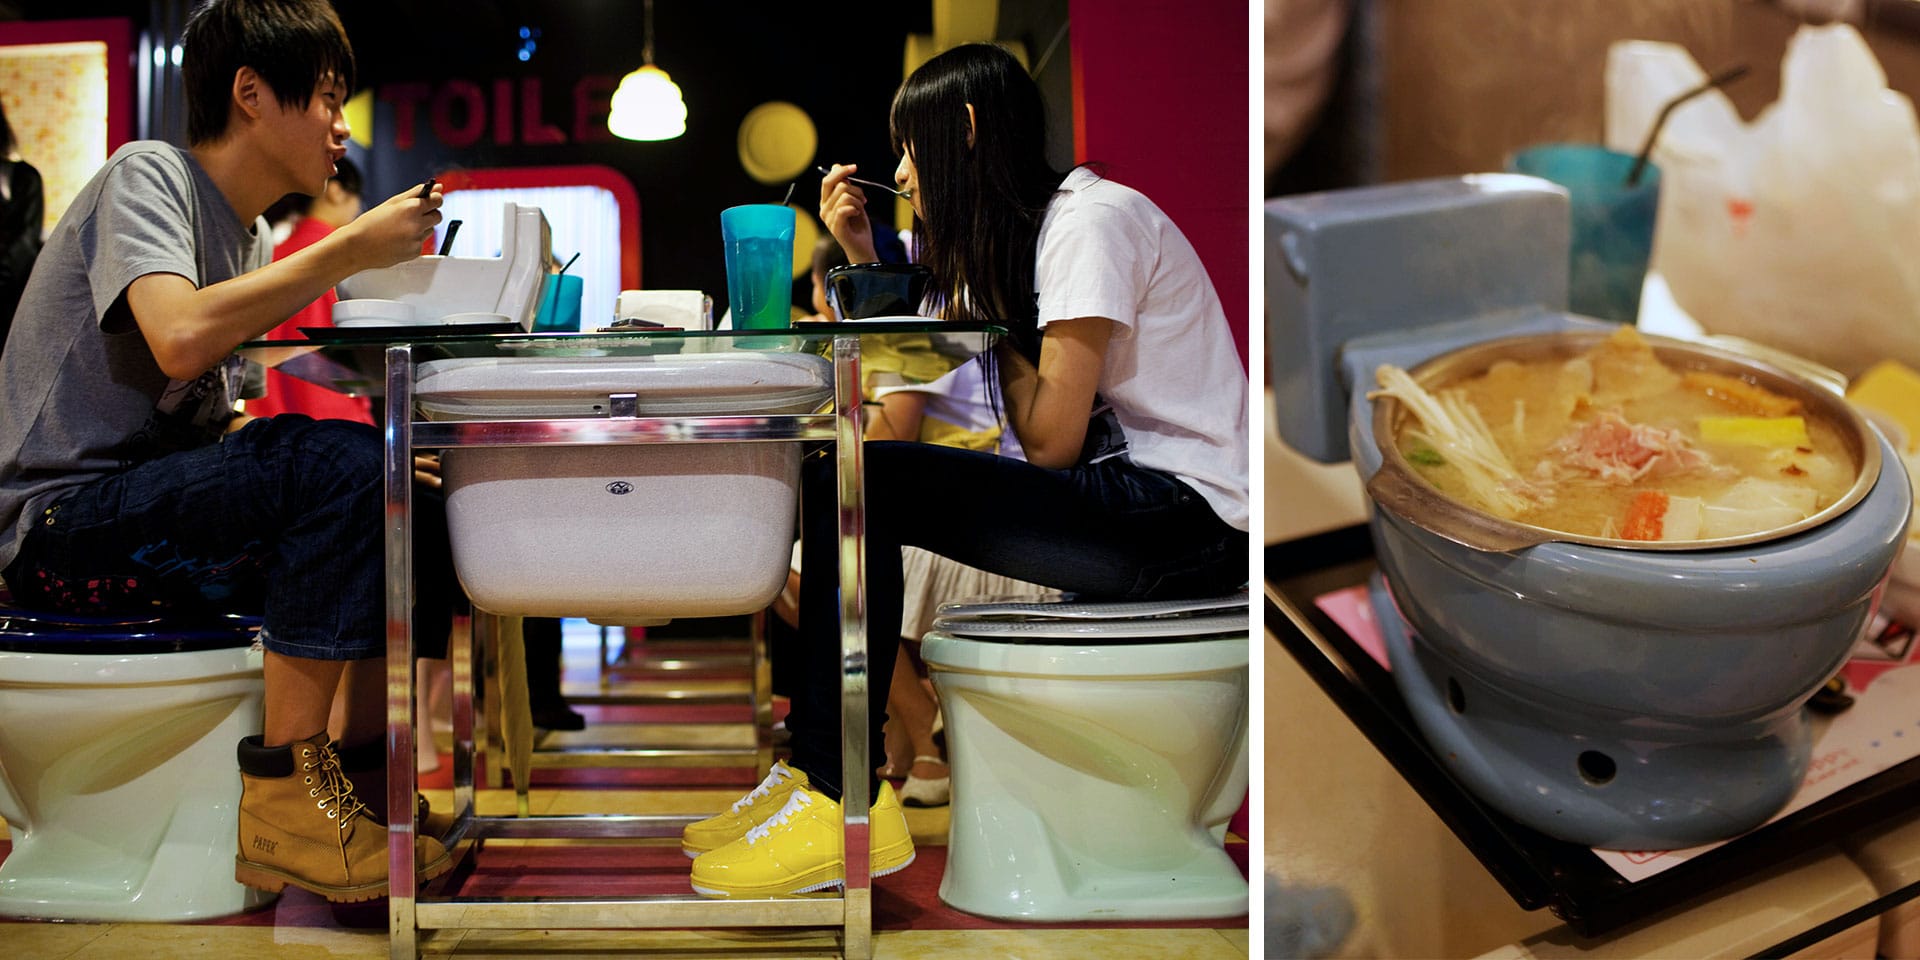 Fortune-Reading Birds and Toilet-Themed Restaurants? Visit Taipei’s Wackiest Attractions